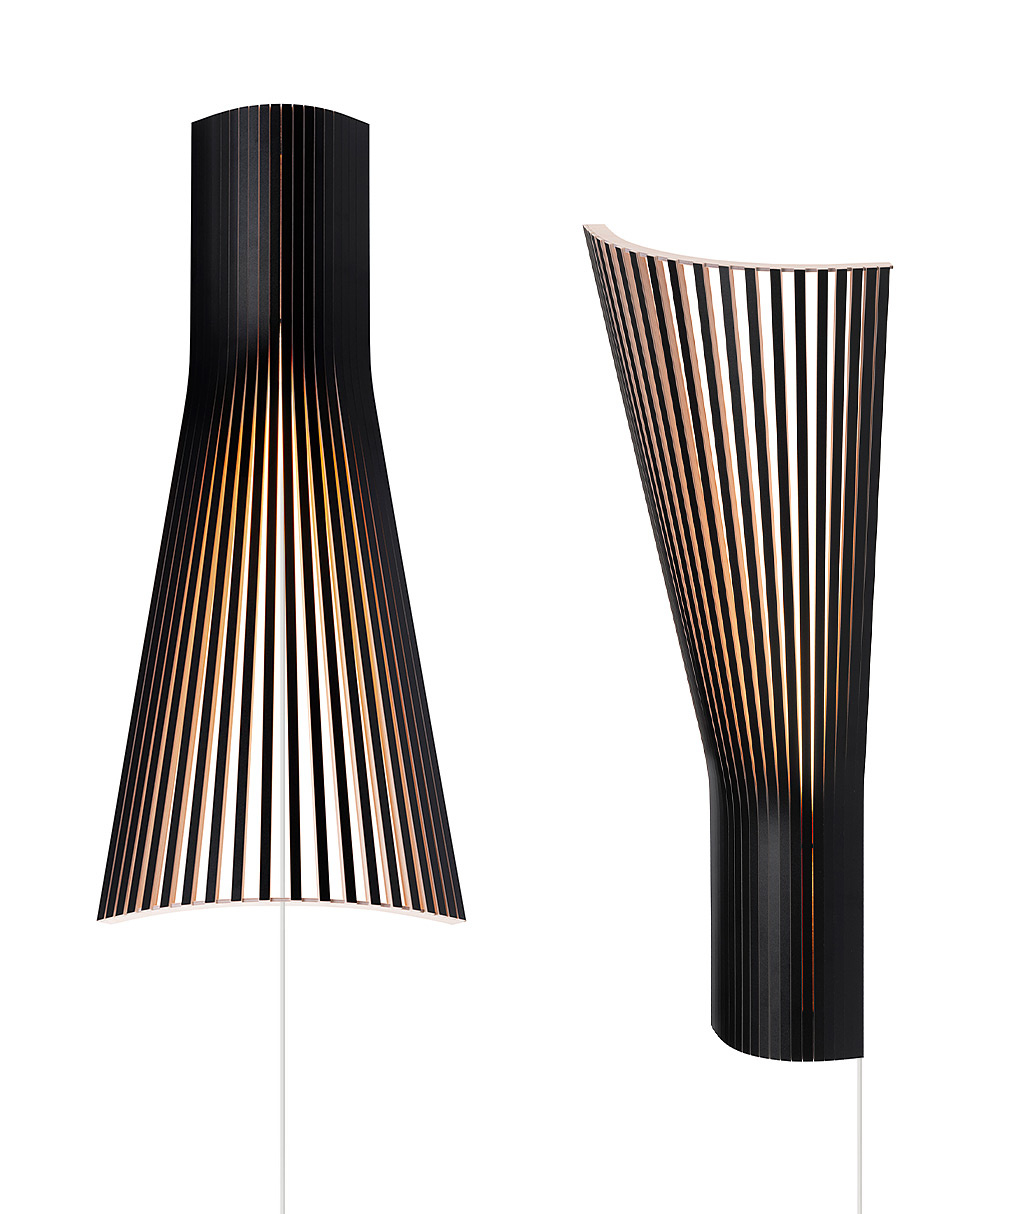 Secto 4236 corner lamp is available in black laminated